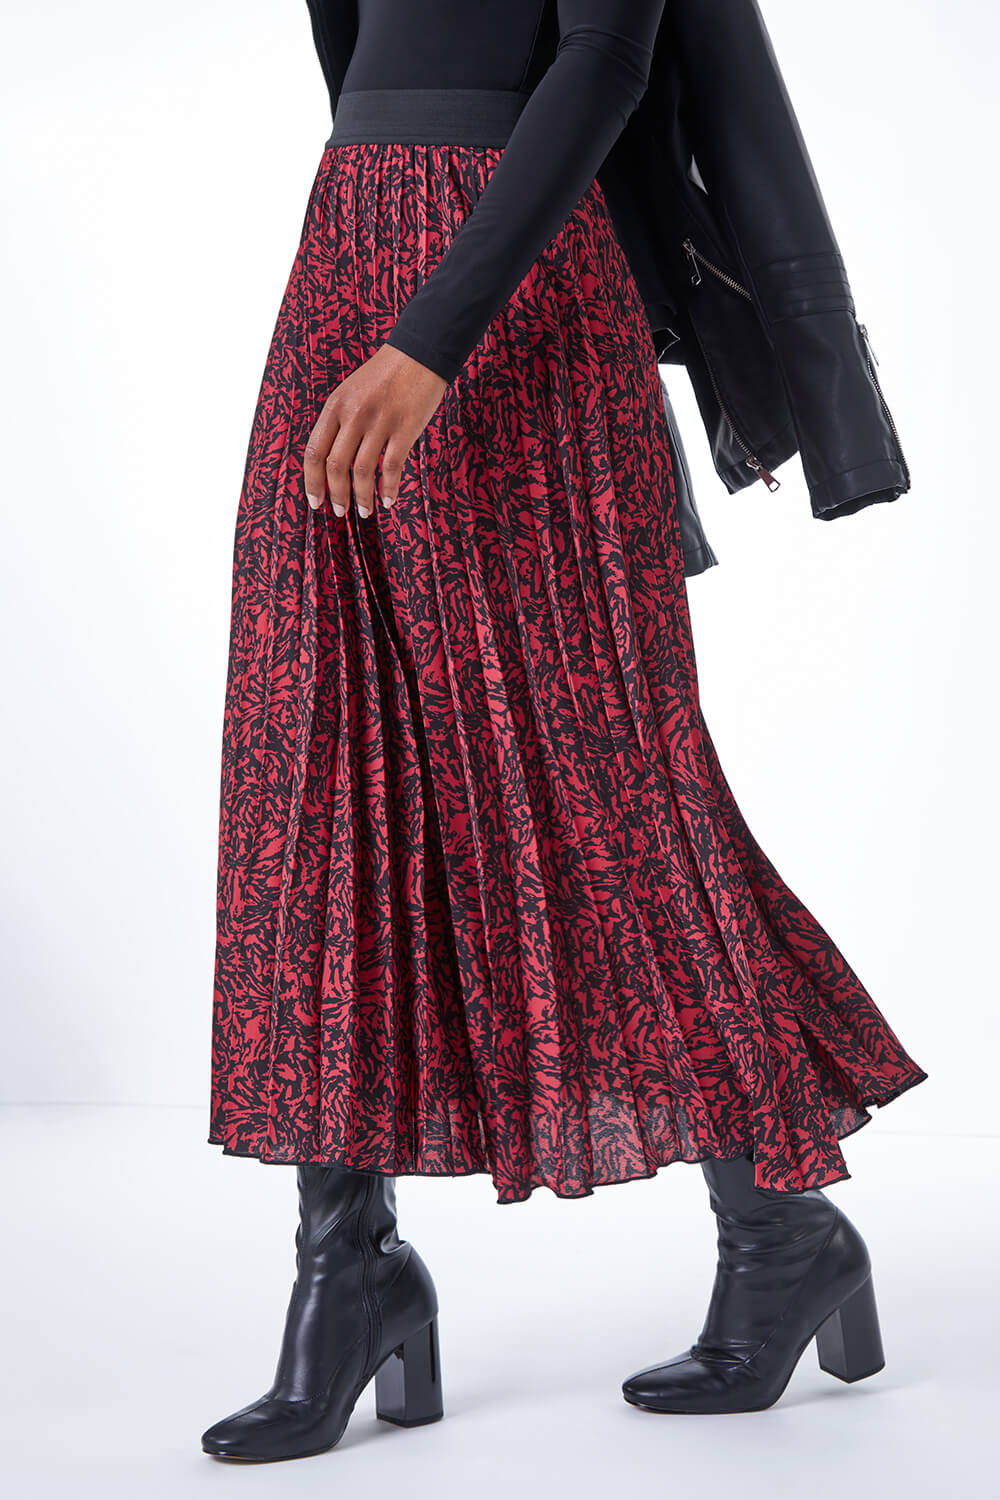 Red Petite Abstract Print Pleated Skirt, Image 5 of 5